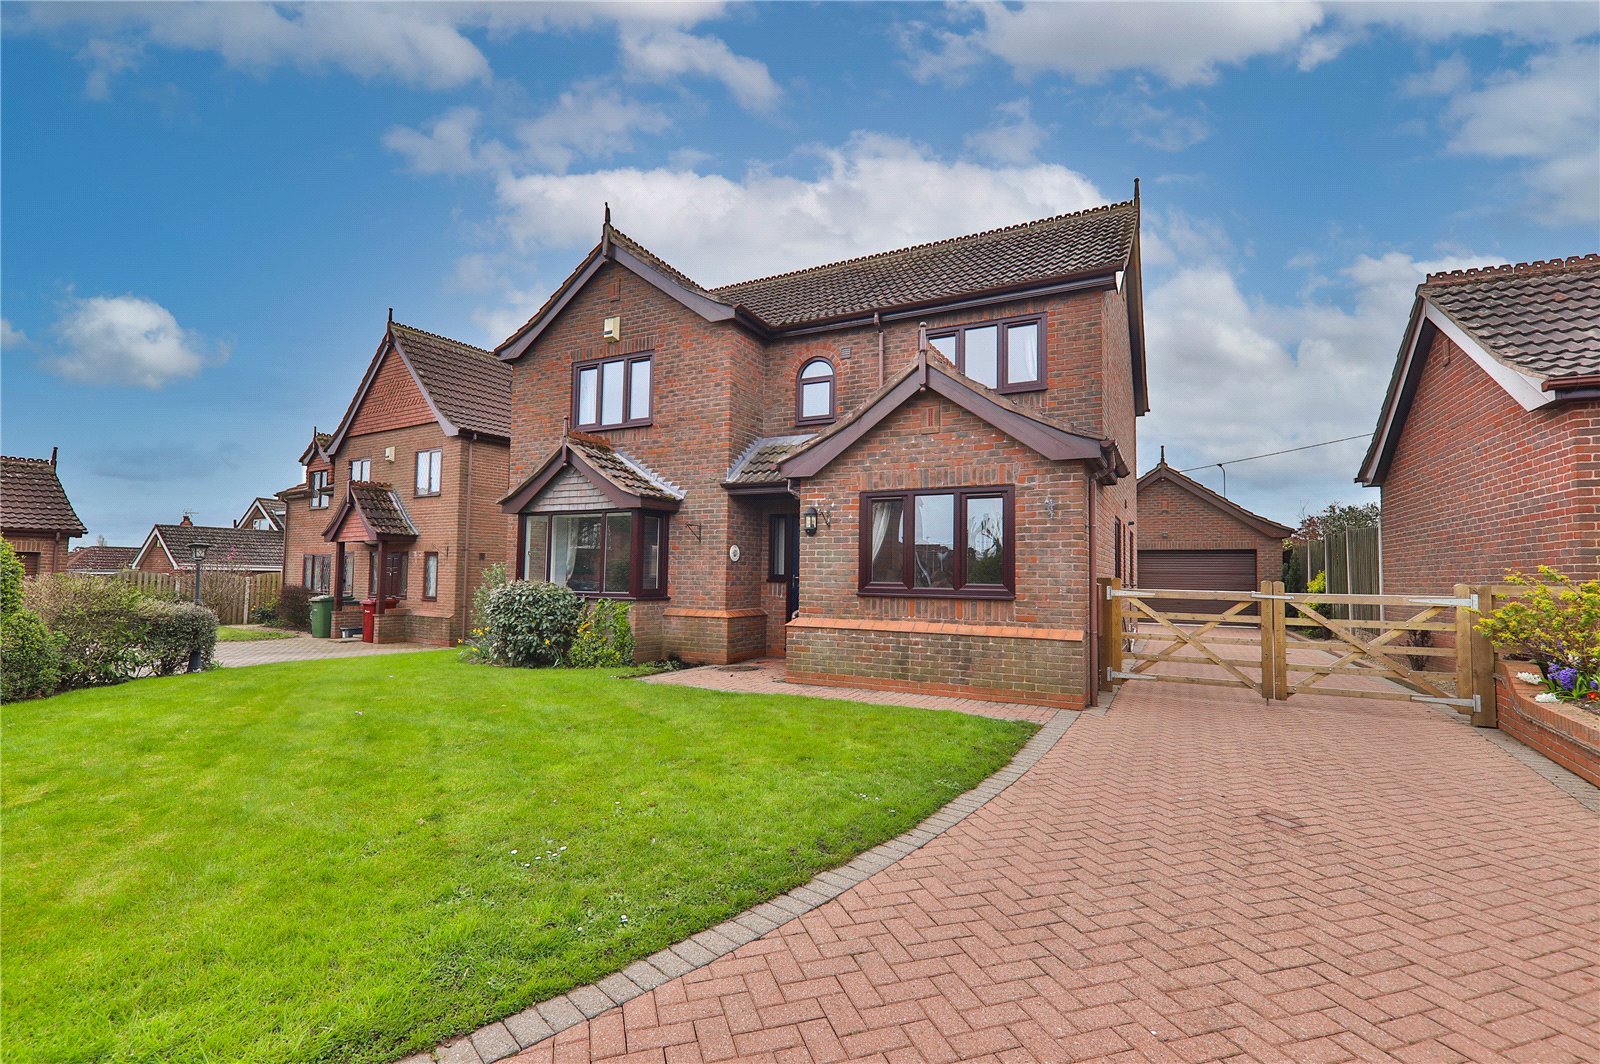 4 bed house for sale in Schofield Close, Barrow-upon-Humber - Property Image 1